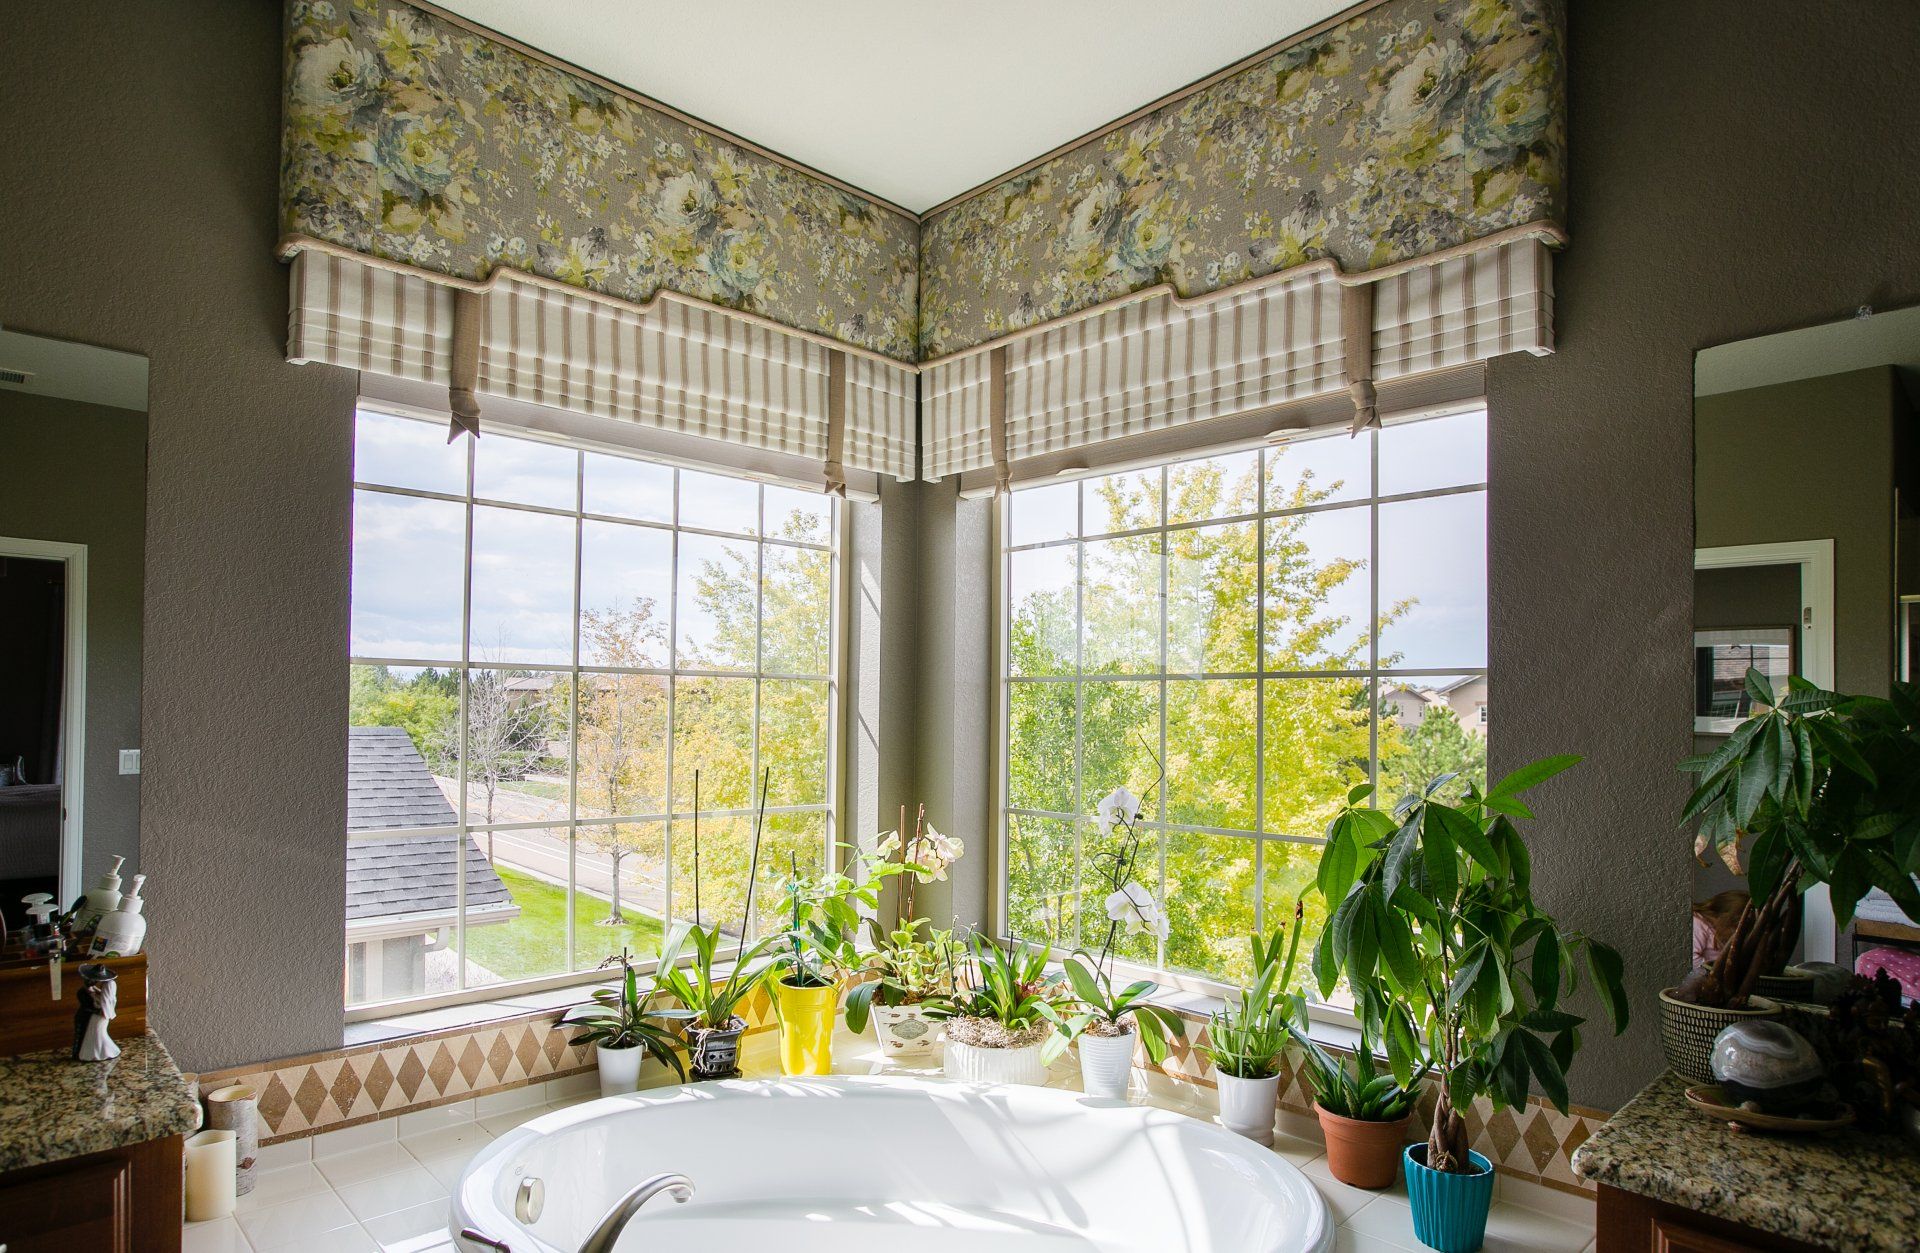 Tub surrounded by plants with striped roman shades and floral cornice